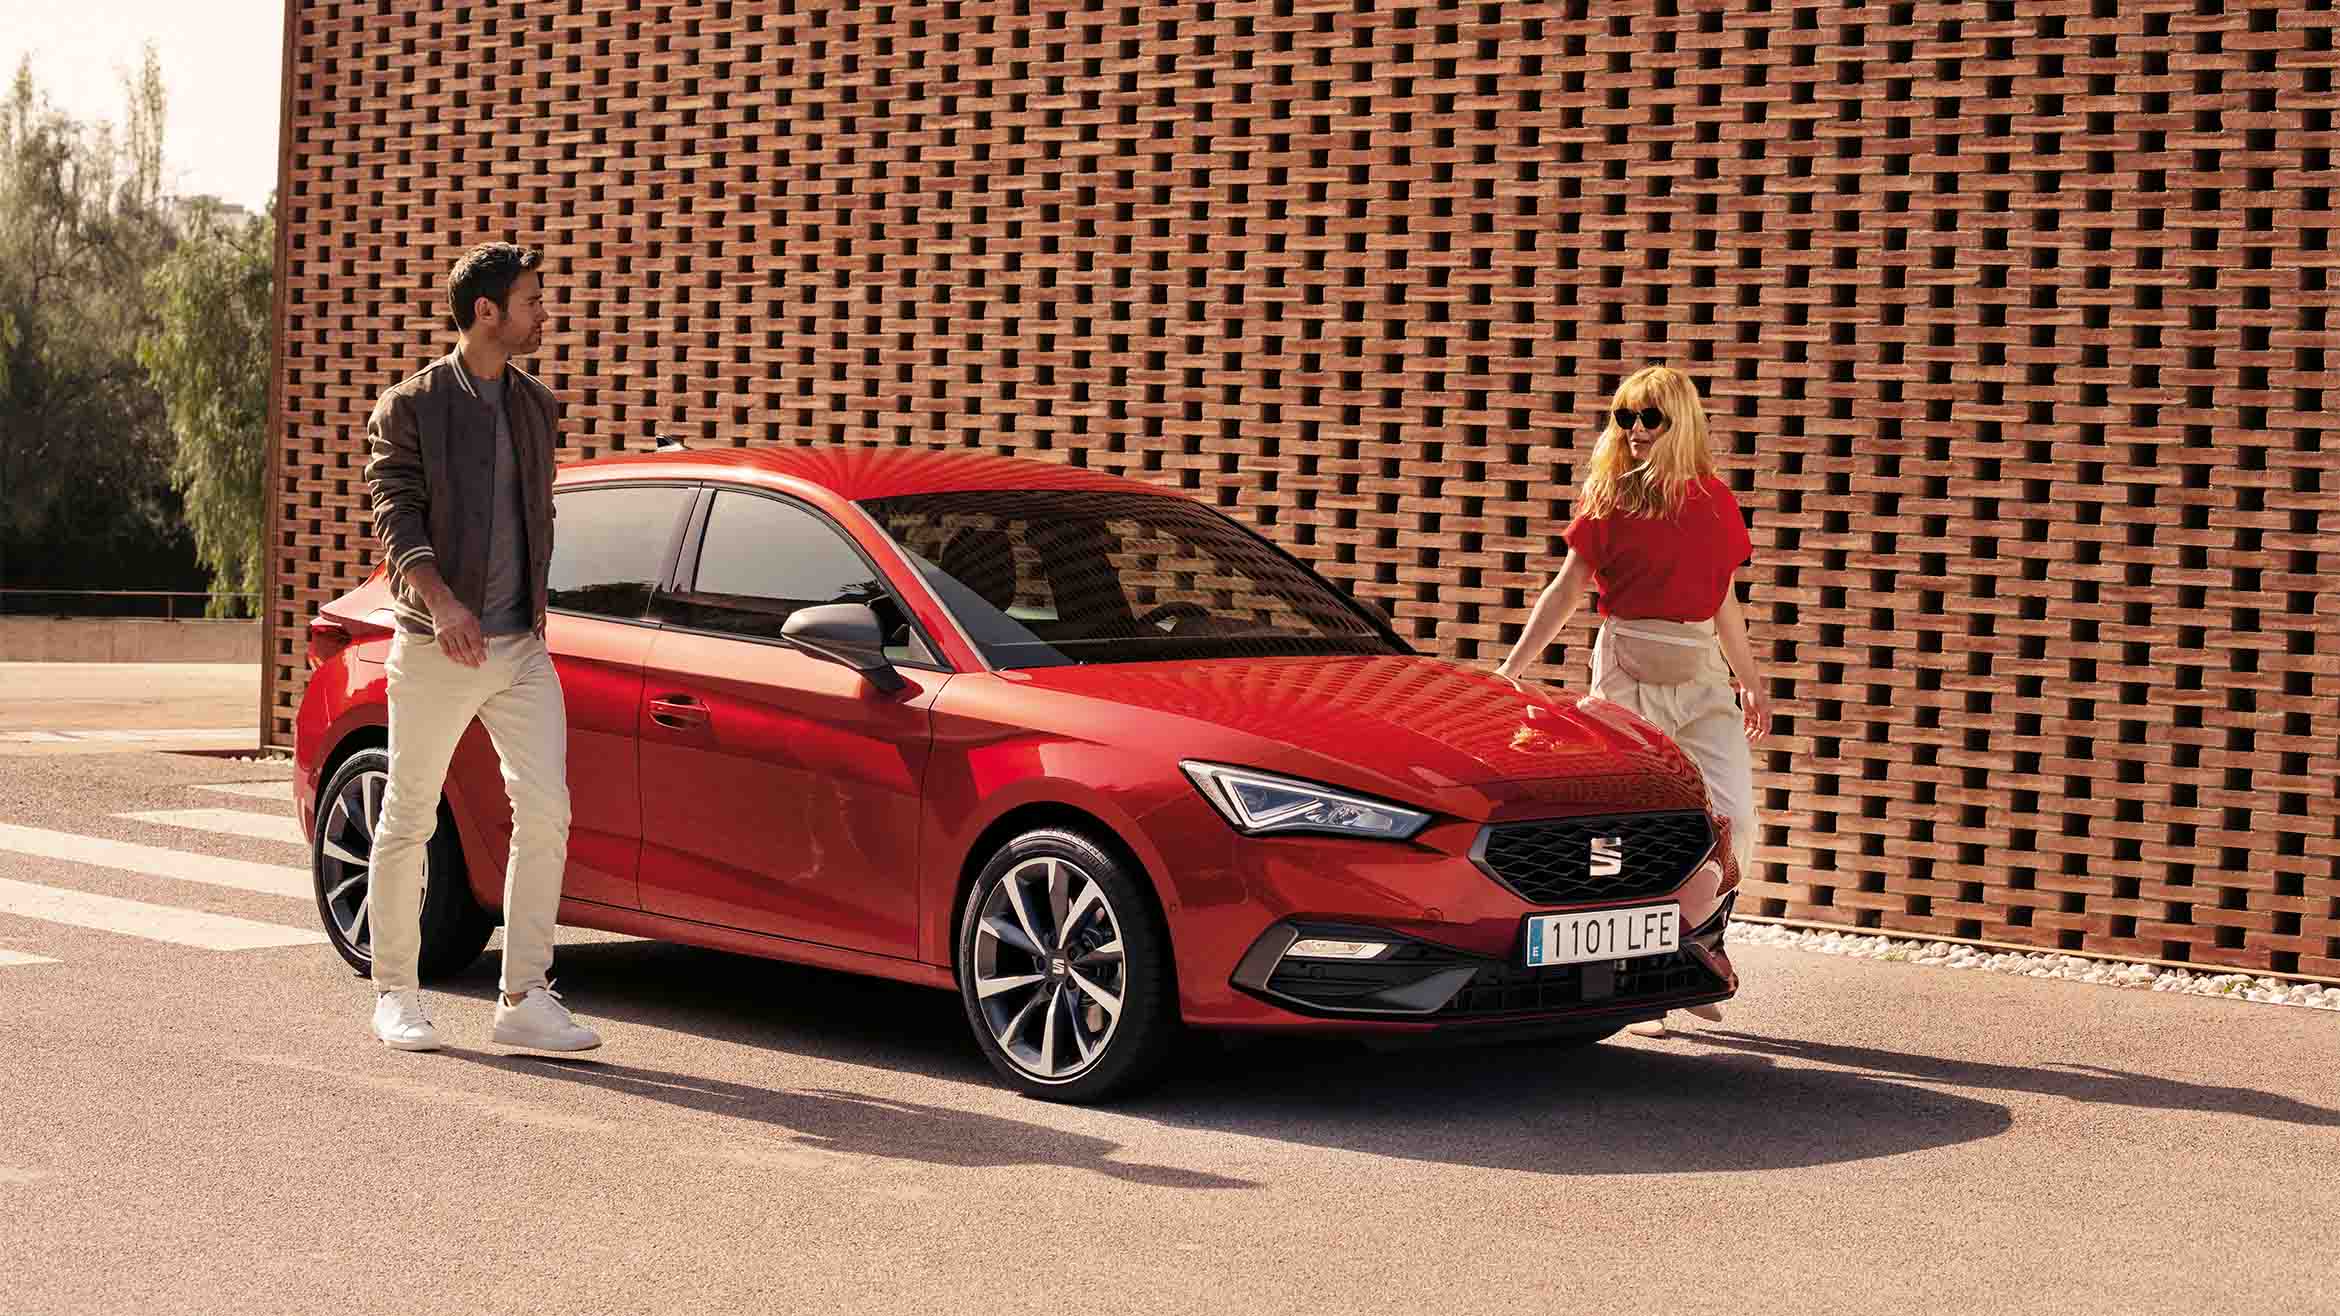 A red SEAT Leon 5D Heather OW parked in front of a brick wall. The car features sleek, aerodynamic lines, LED headlights and alloy wheels. A man and a woman are standing beside the car, both dressed casually. The man wears a brown jacket and white pants, while the woman wears a red top and beige skirt, highlighting the car’s stylish design.